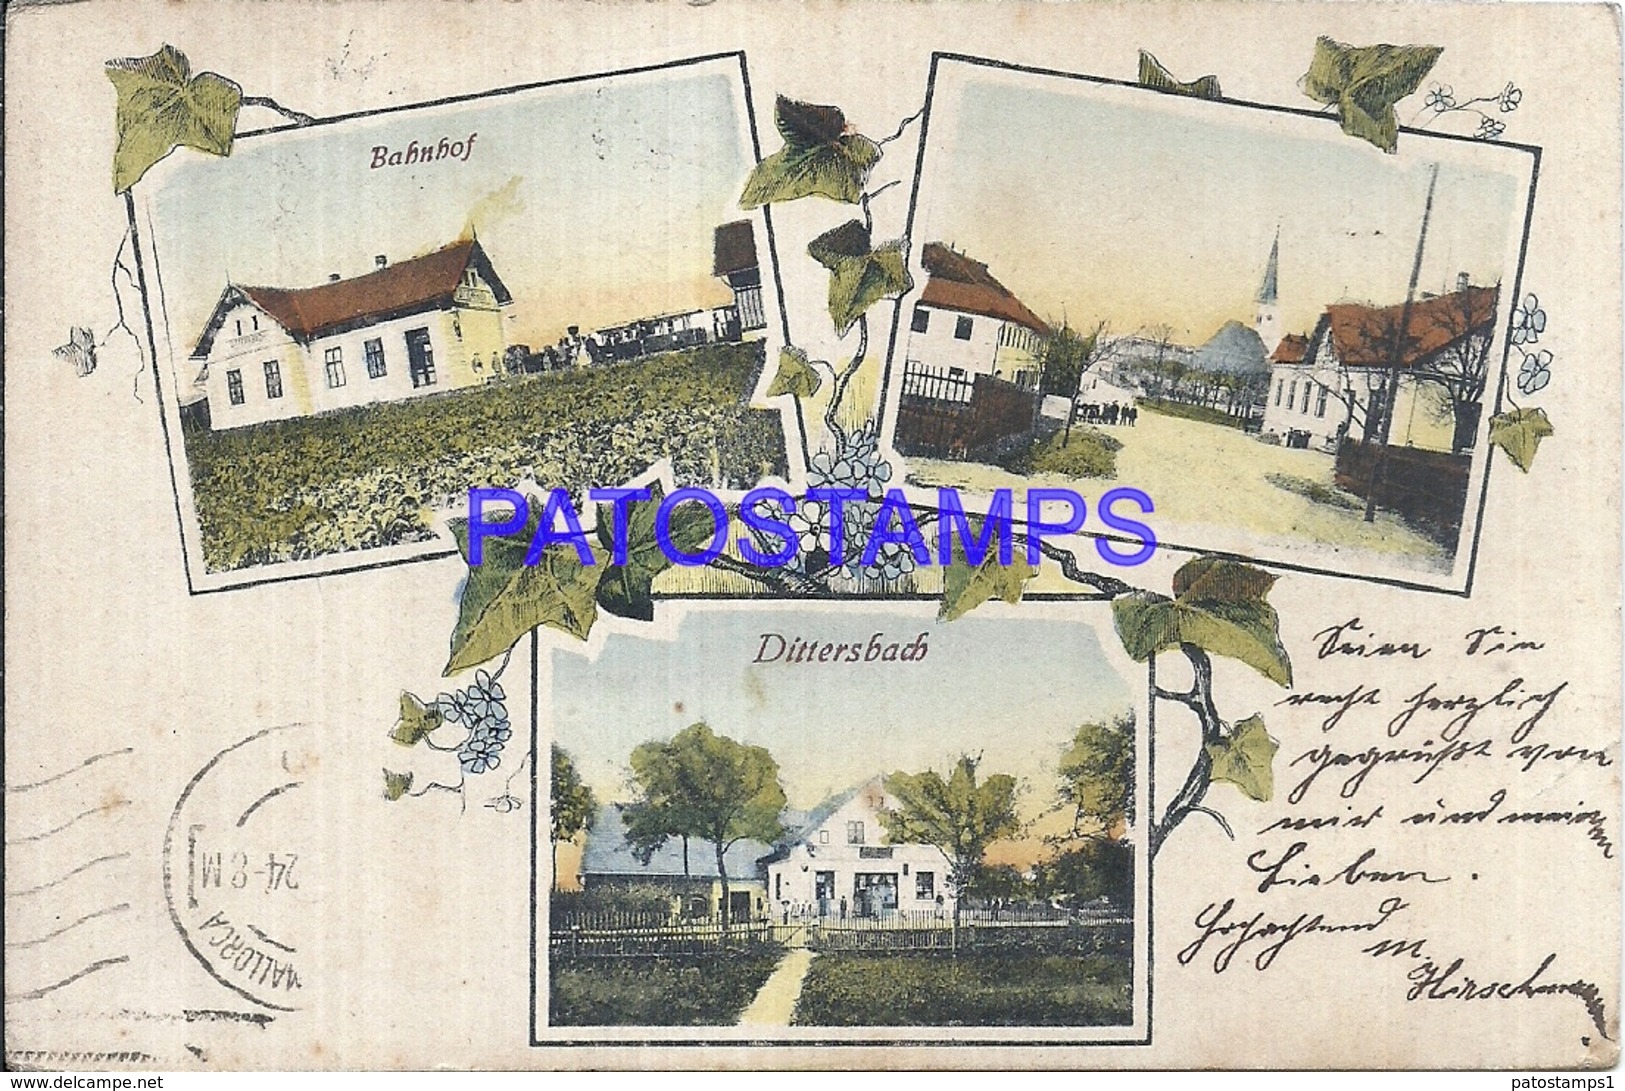 108498 CZECH REPUBLIC DITTERSBAD STATION TRAIN MULTI VIEW SPOTTED CIRCULATED TO SPAIN POSTAL POSTCARD - Czech Republic